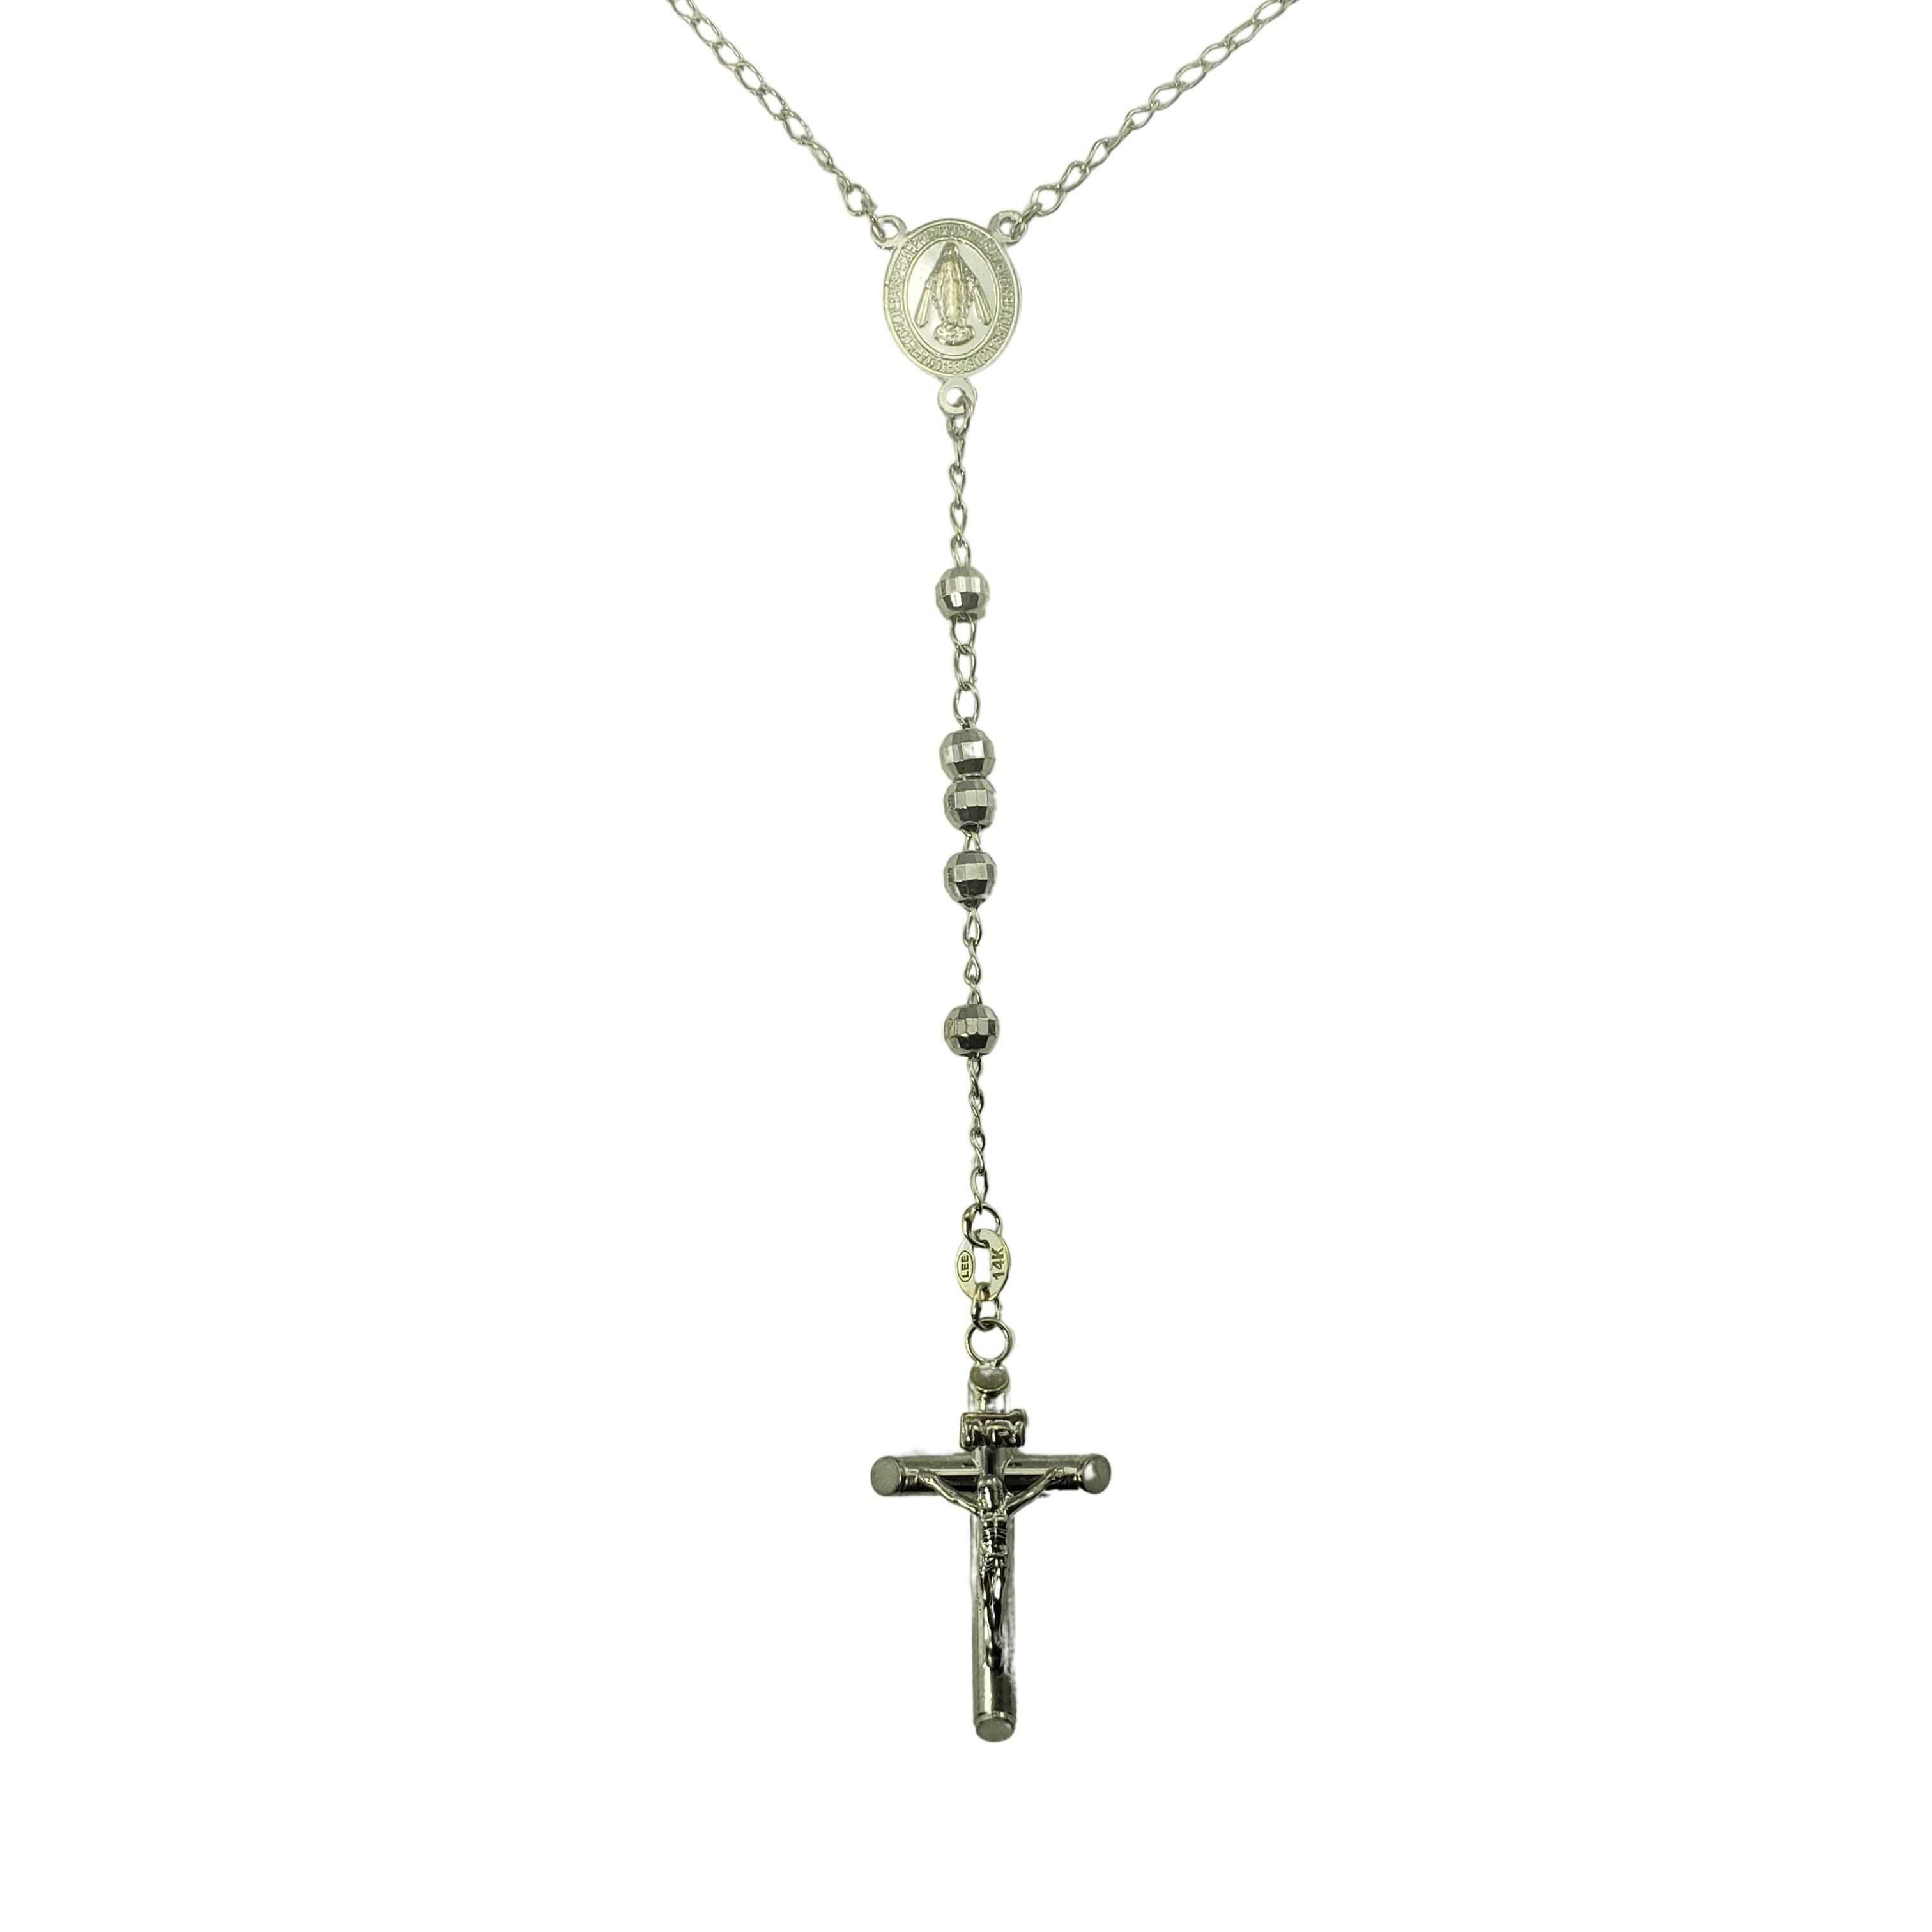 14 Karat White Gold Rosary Beads-

These beautiful rosary beads are crafted in beautifully detailed 14K white gold.

Size: 17.5 inches 
         27 mm x 16 mm (cross)
         4 mm (bead width)

Weight:  12.7 dwt. /  8.1 gr.

Stamped: 14K

Very good